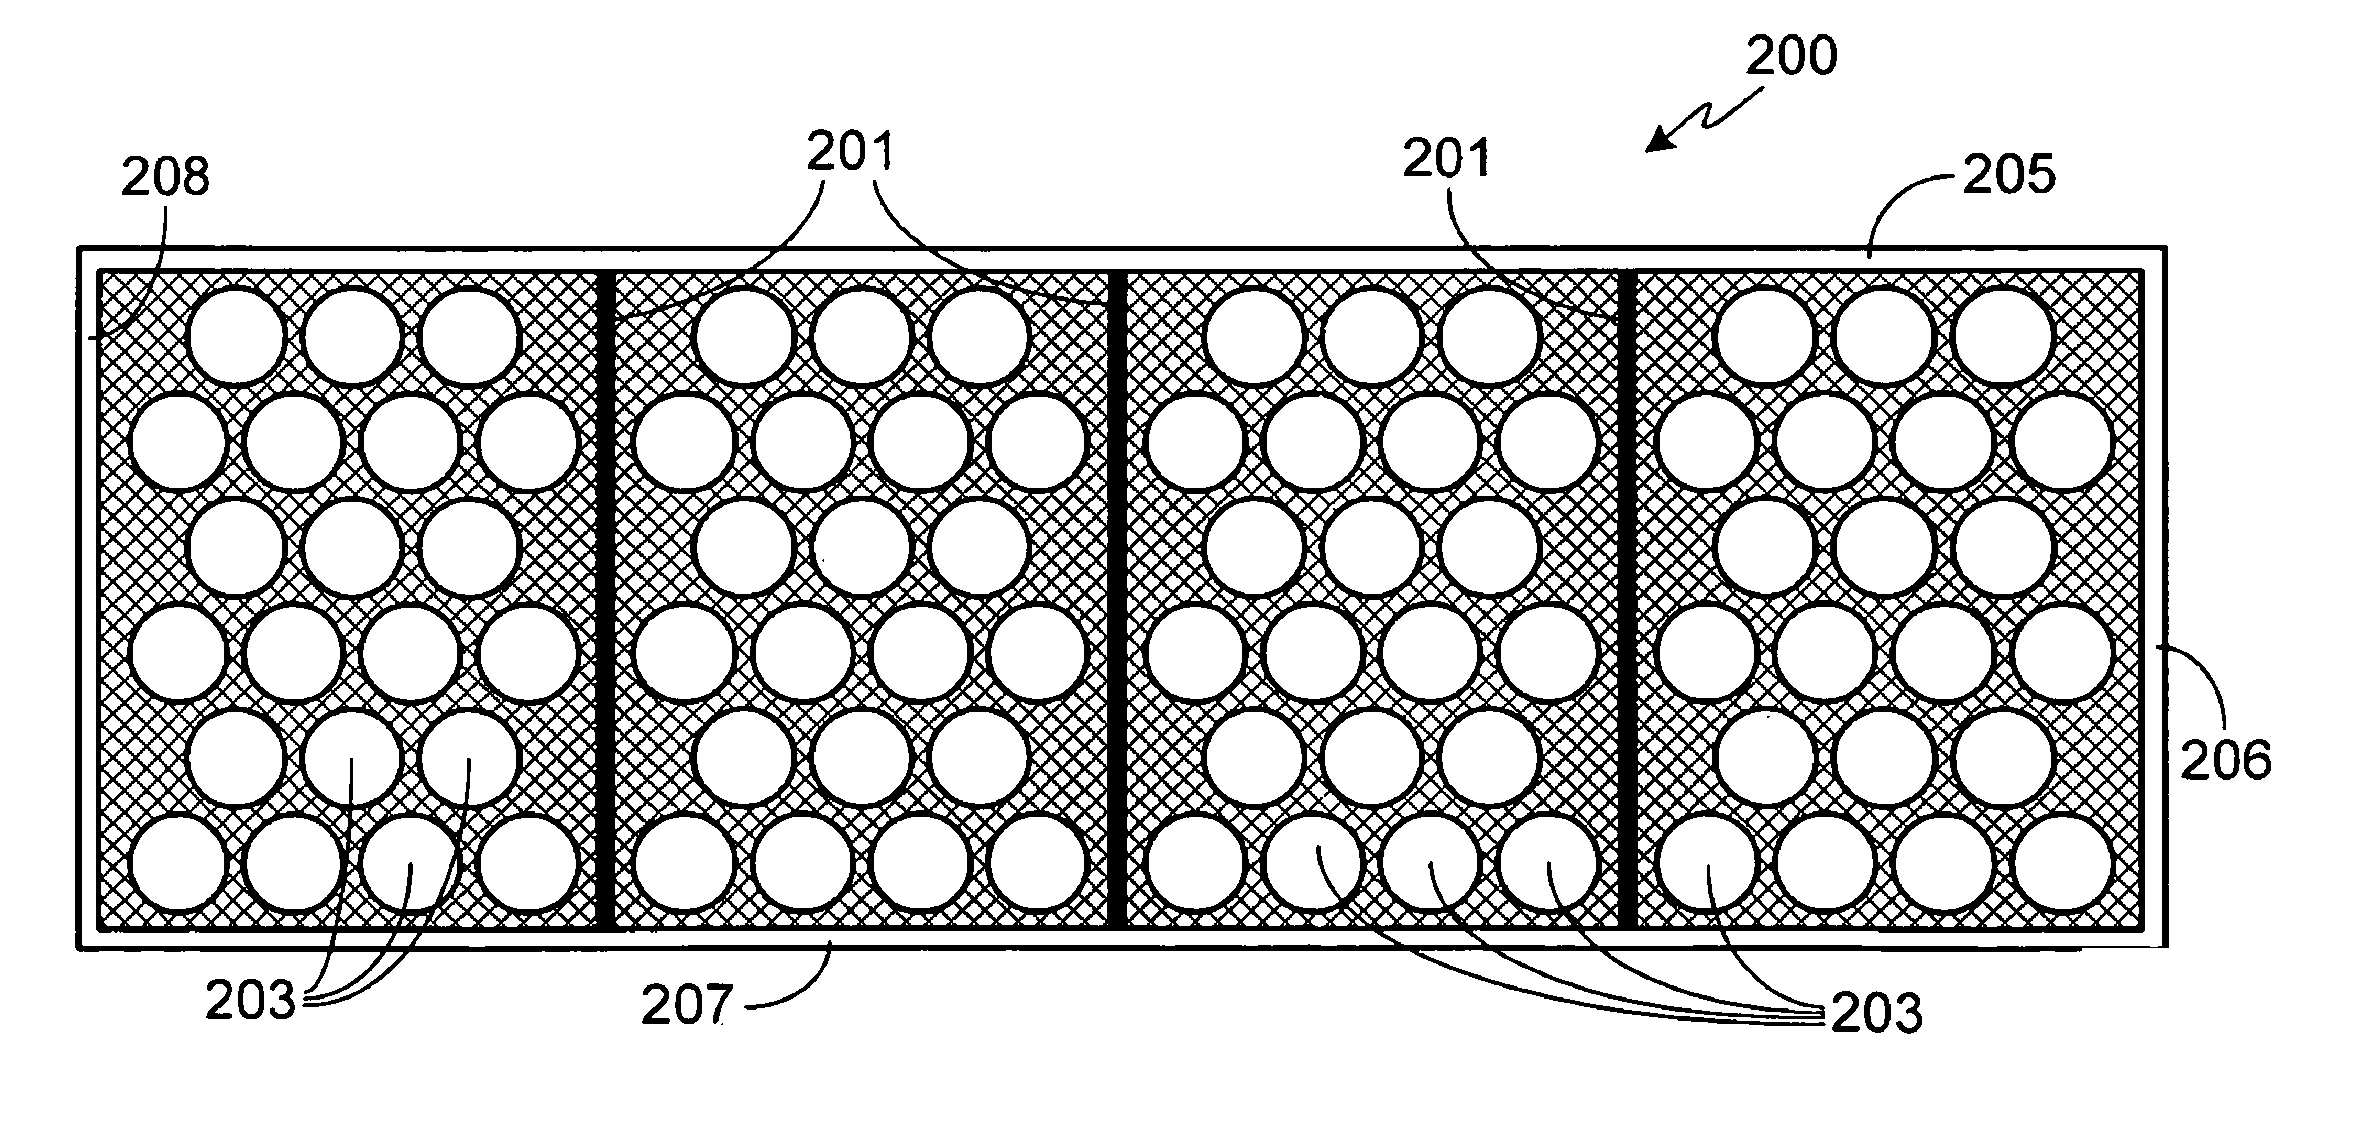 Thermal barrier structure for containing thermal runaway propagation within a battery pack